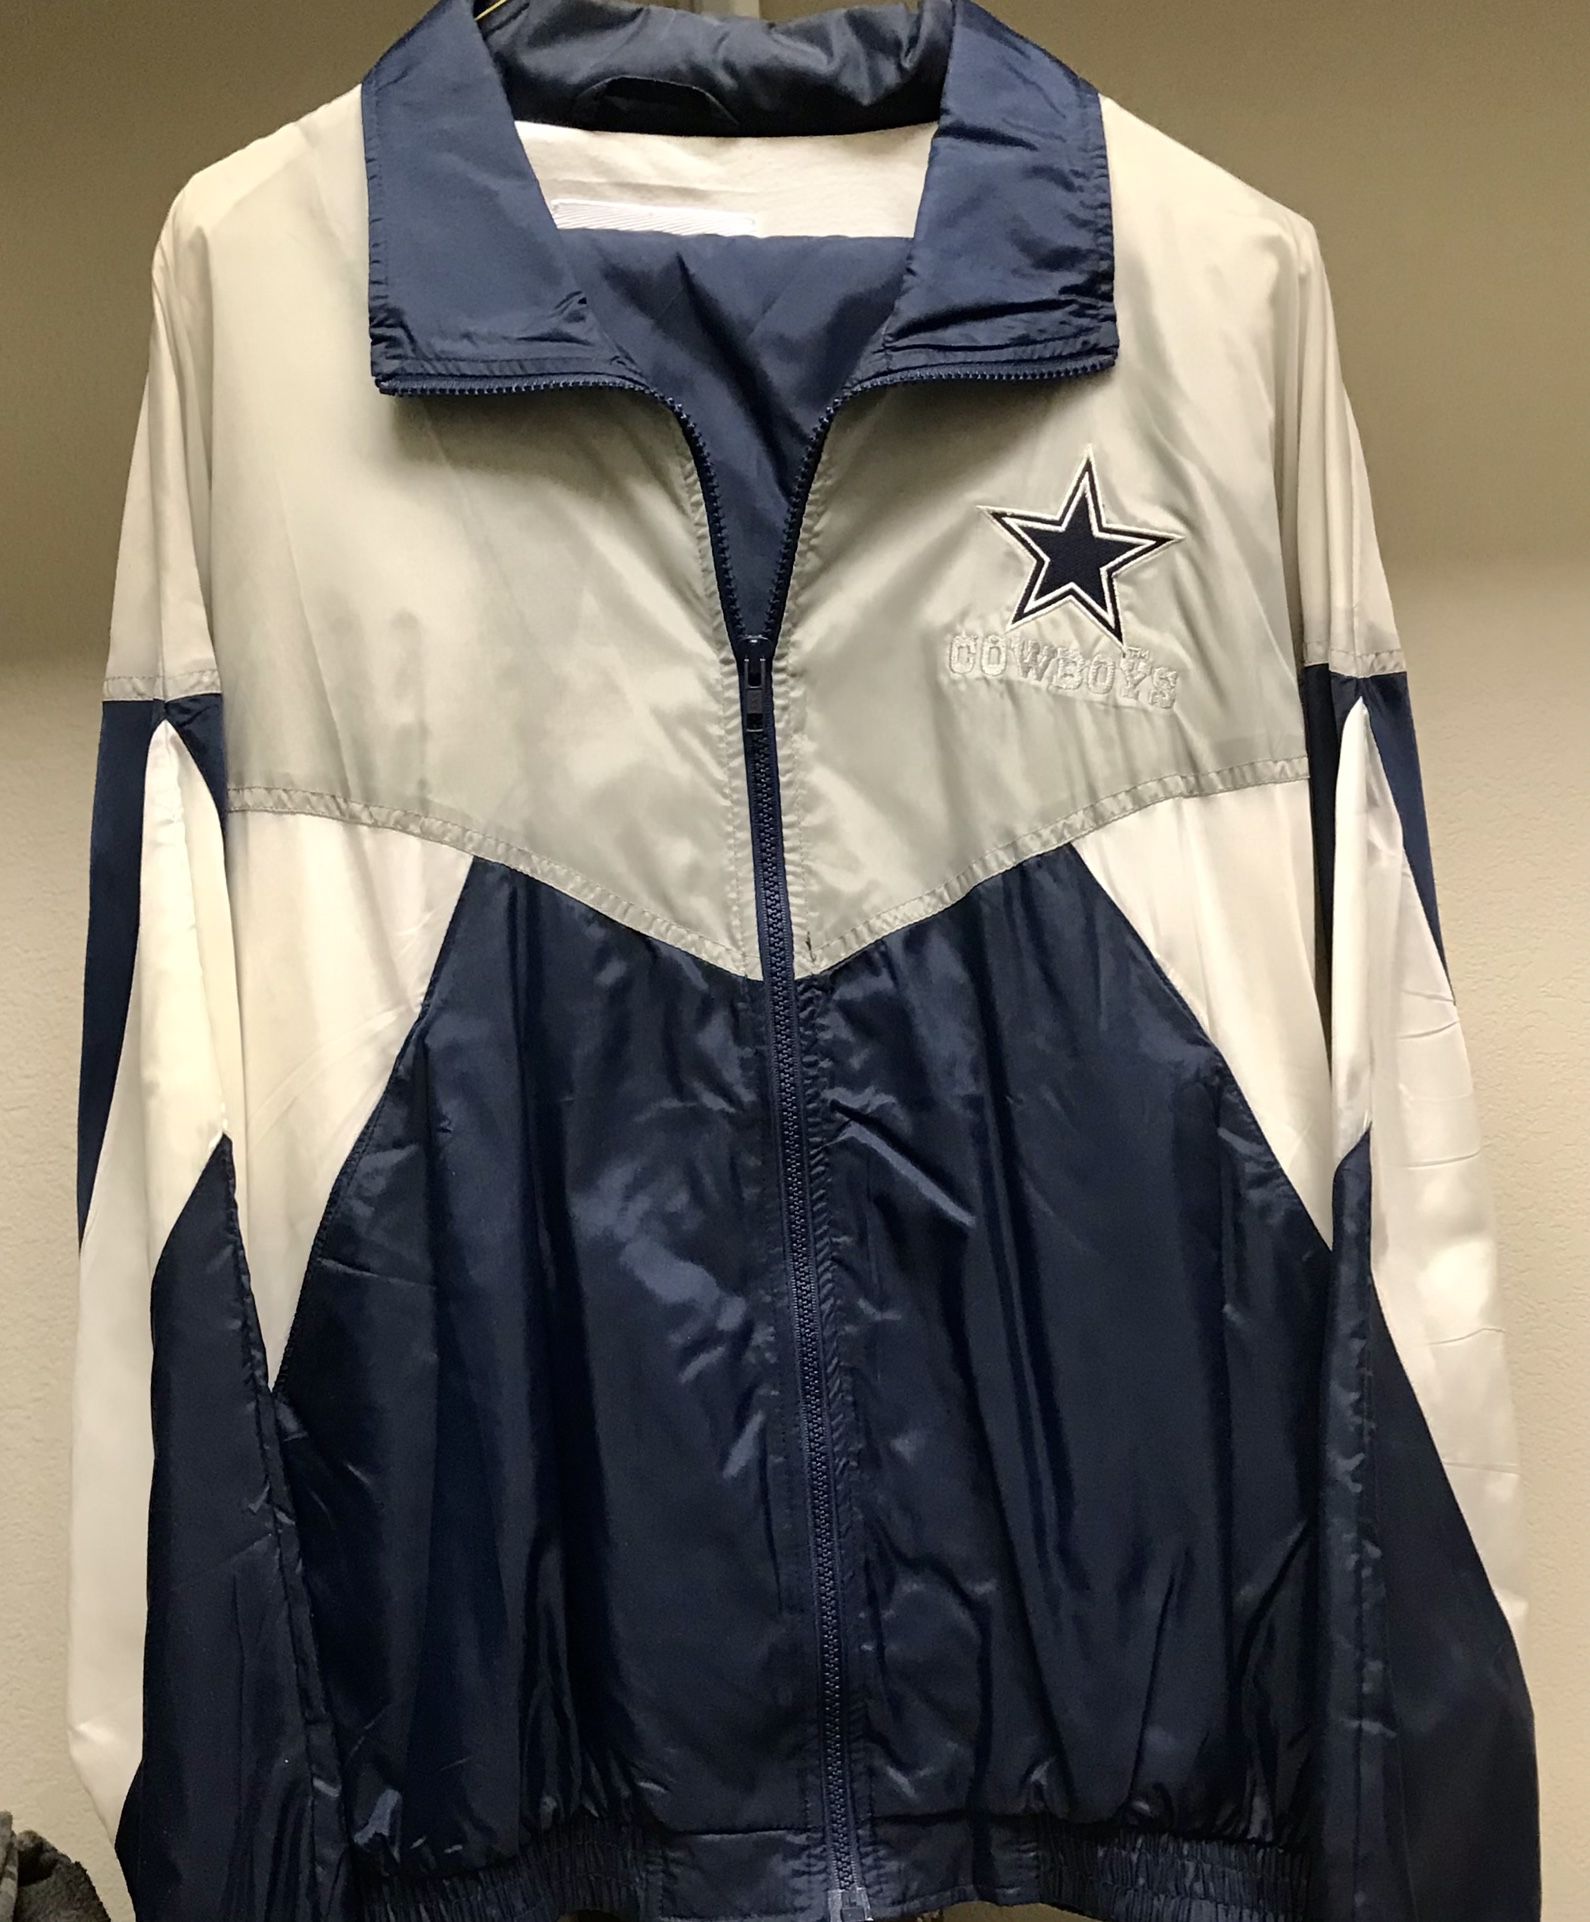 dallas cowboys sweat outfit